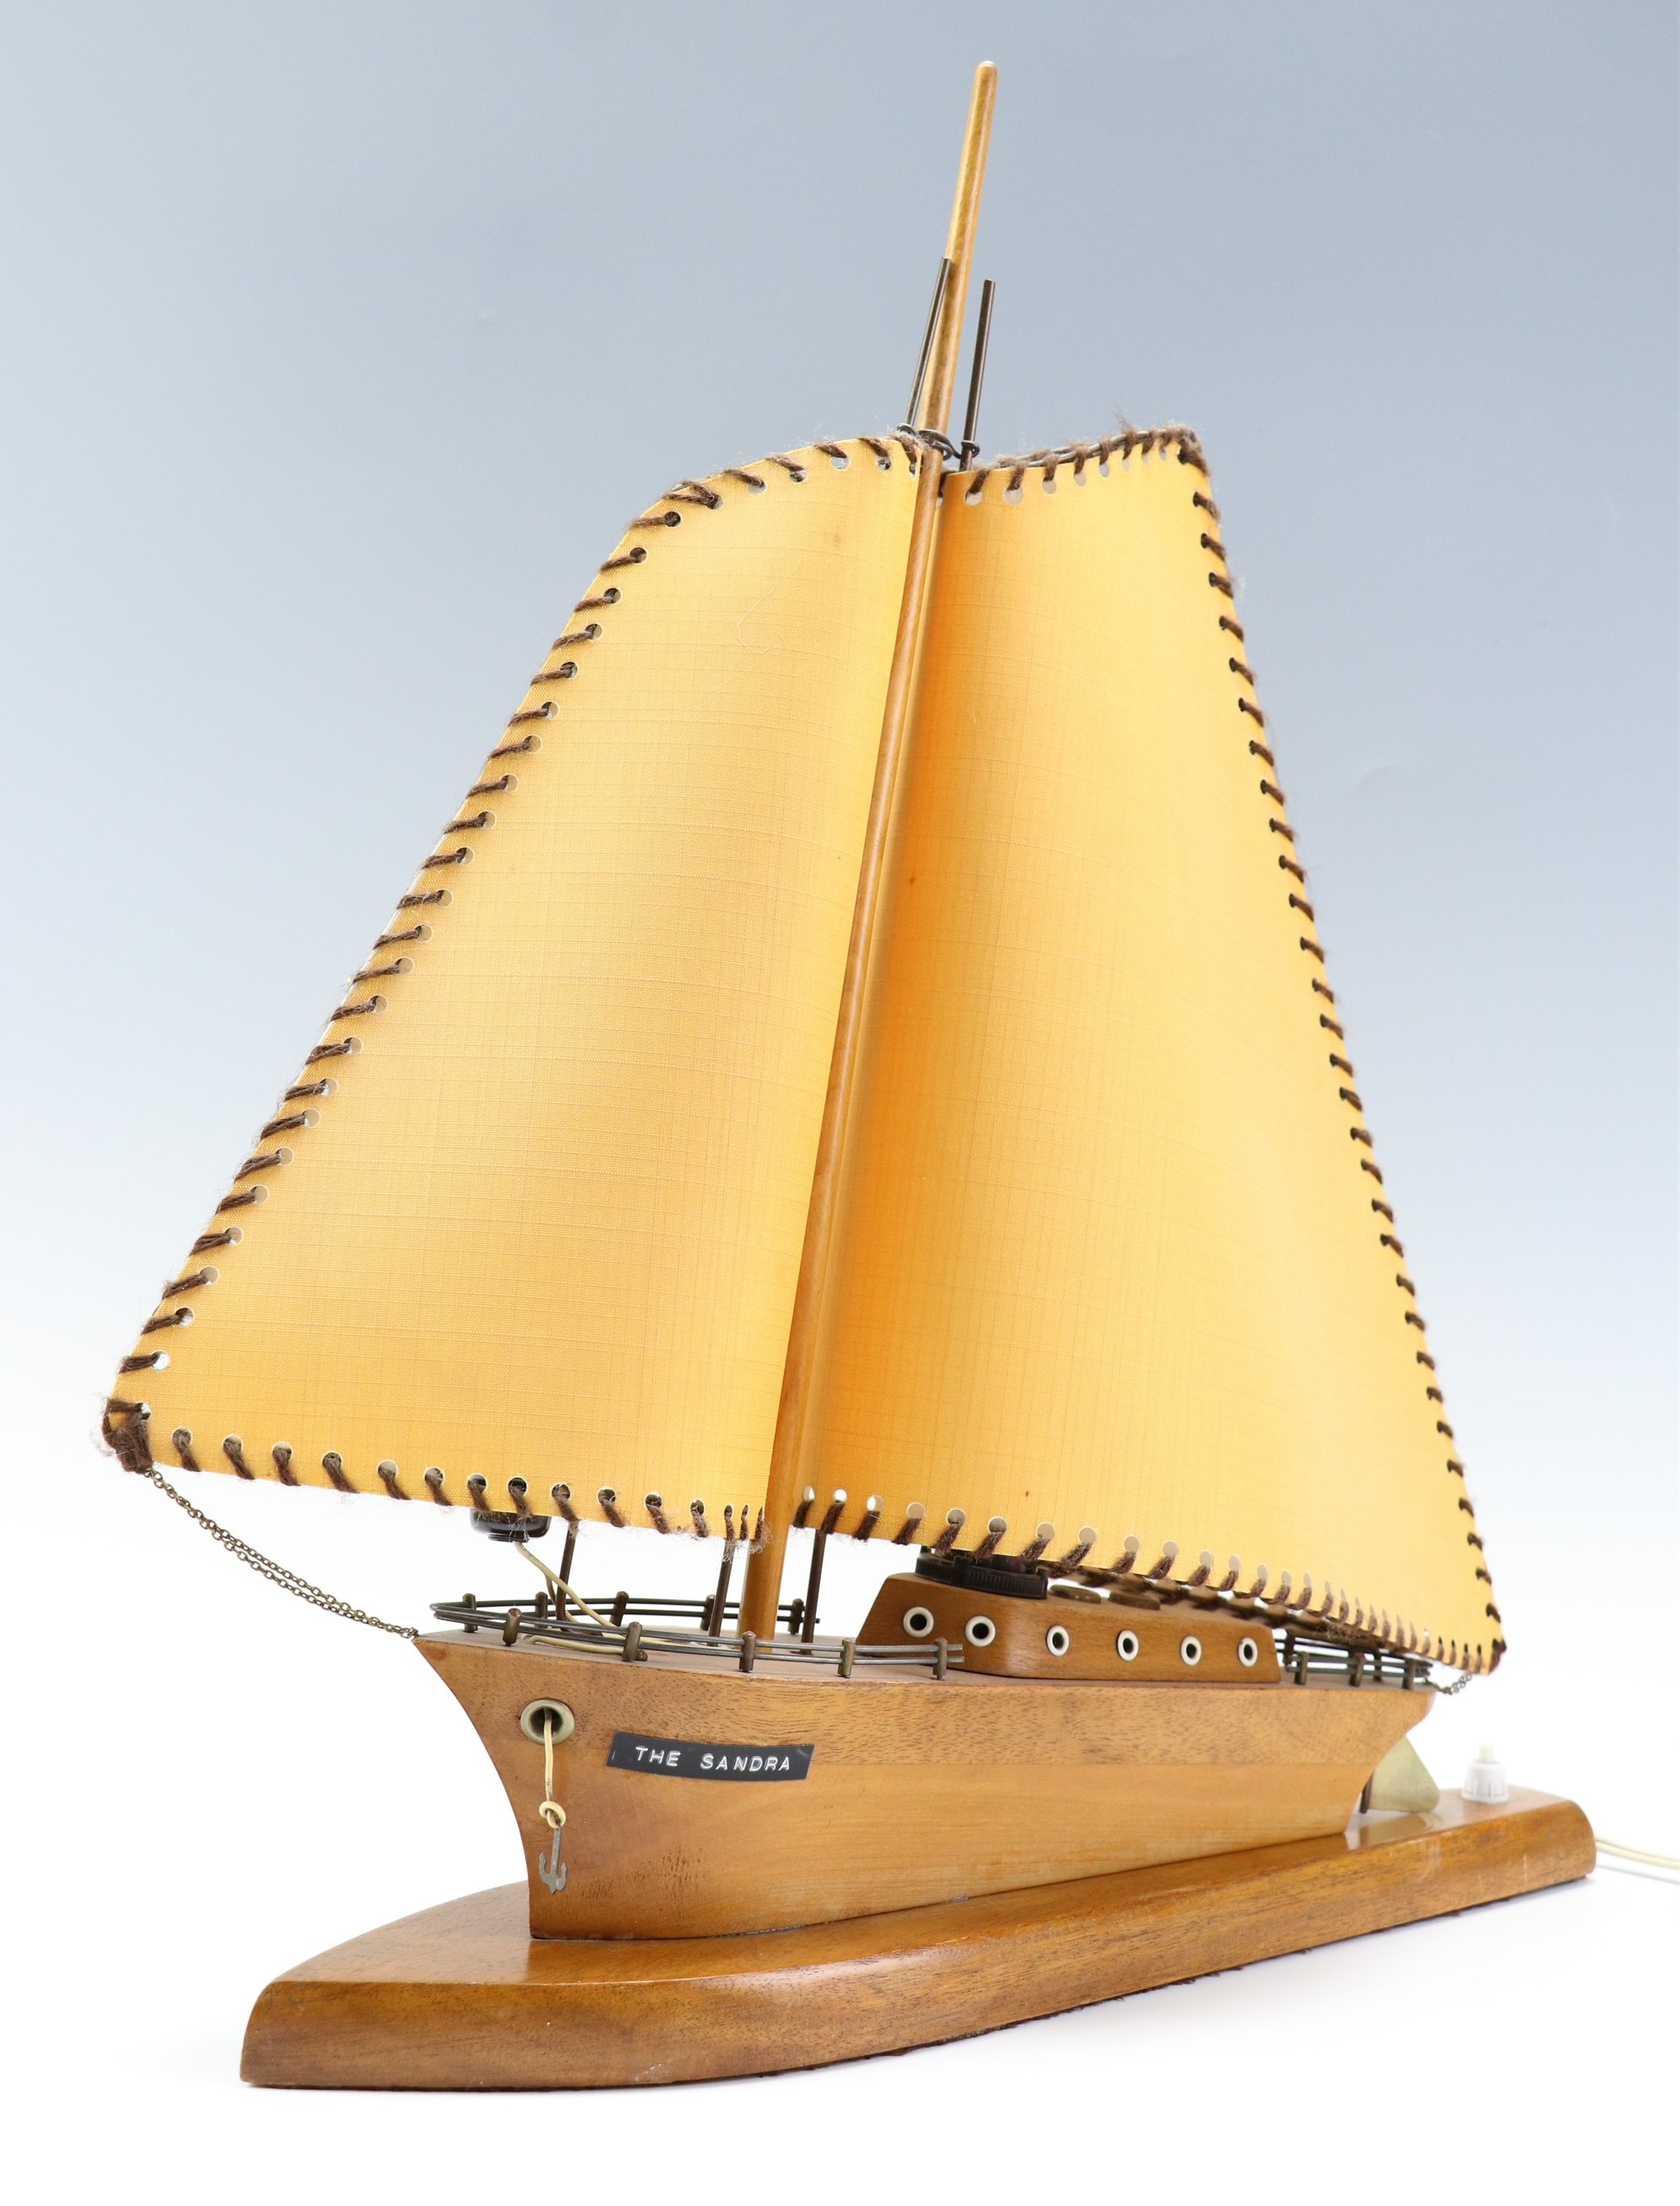 A vintage wooden table lamp in the form of a sailing boat / yacht, 49 cm